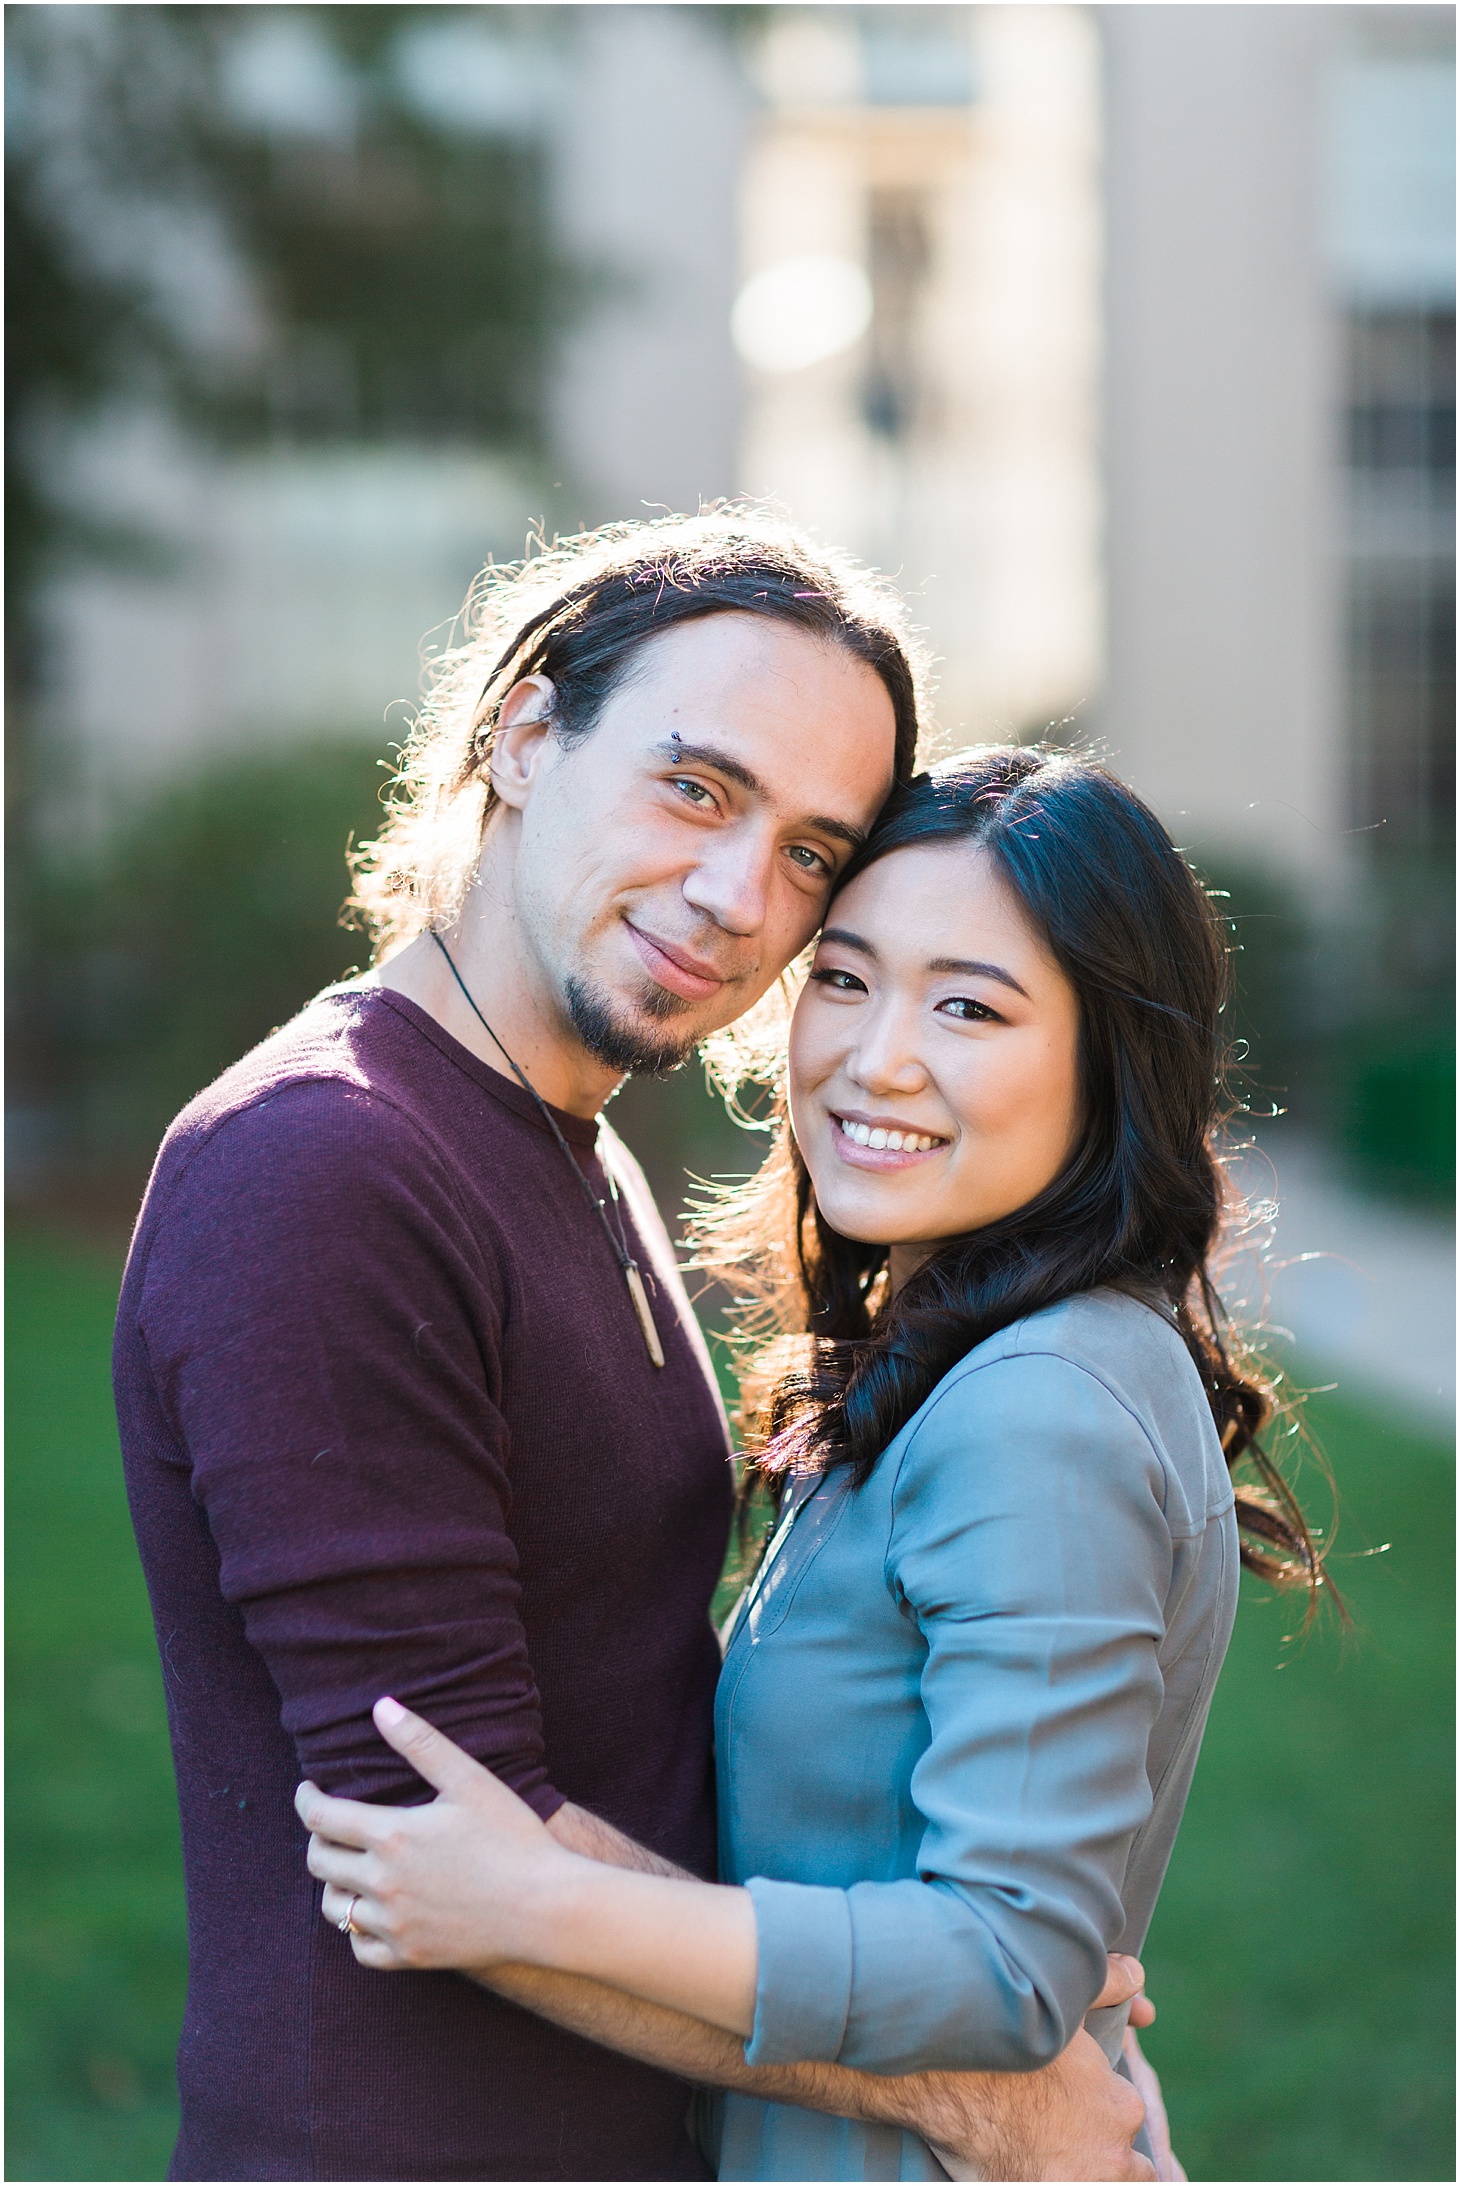 Engagement Portraits at MIT in Cambridge, MA | Sunset Engagement Session in Boston | Sarah Bradshaw Photography